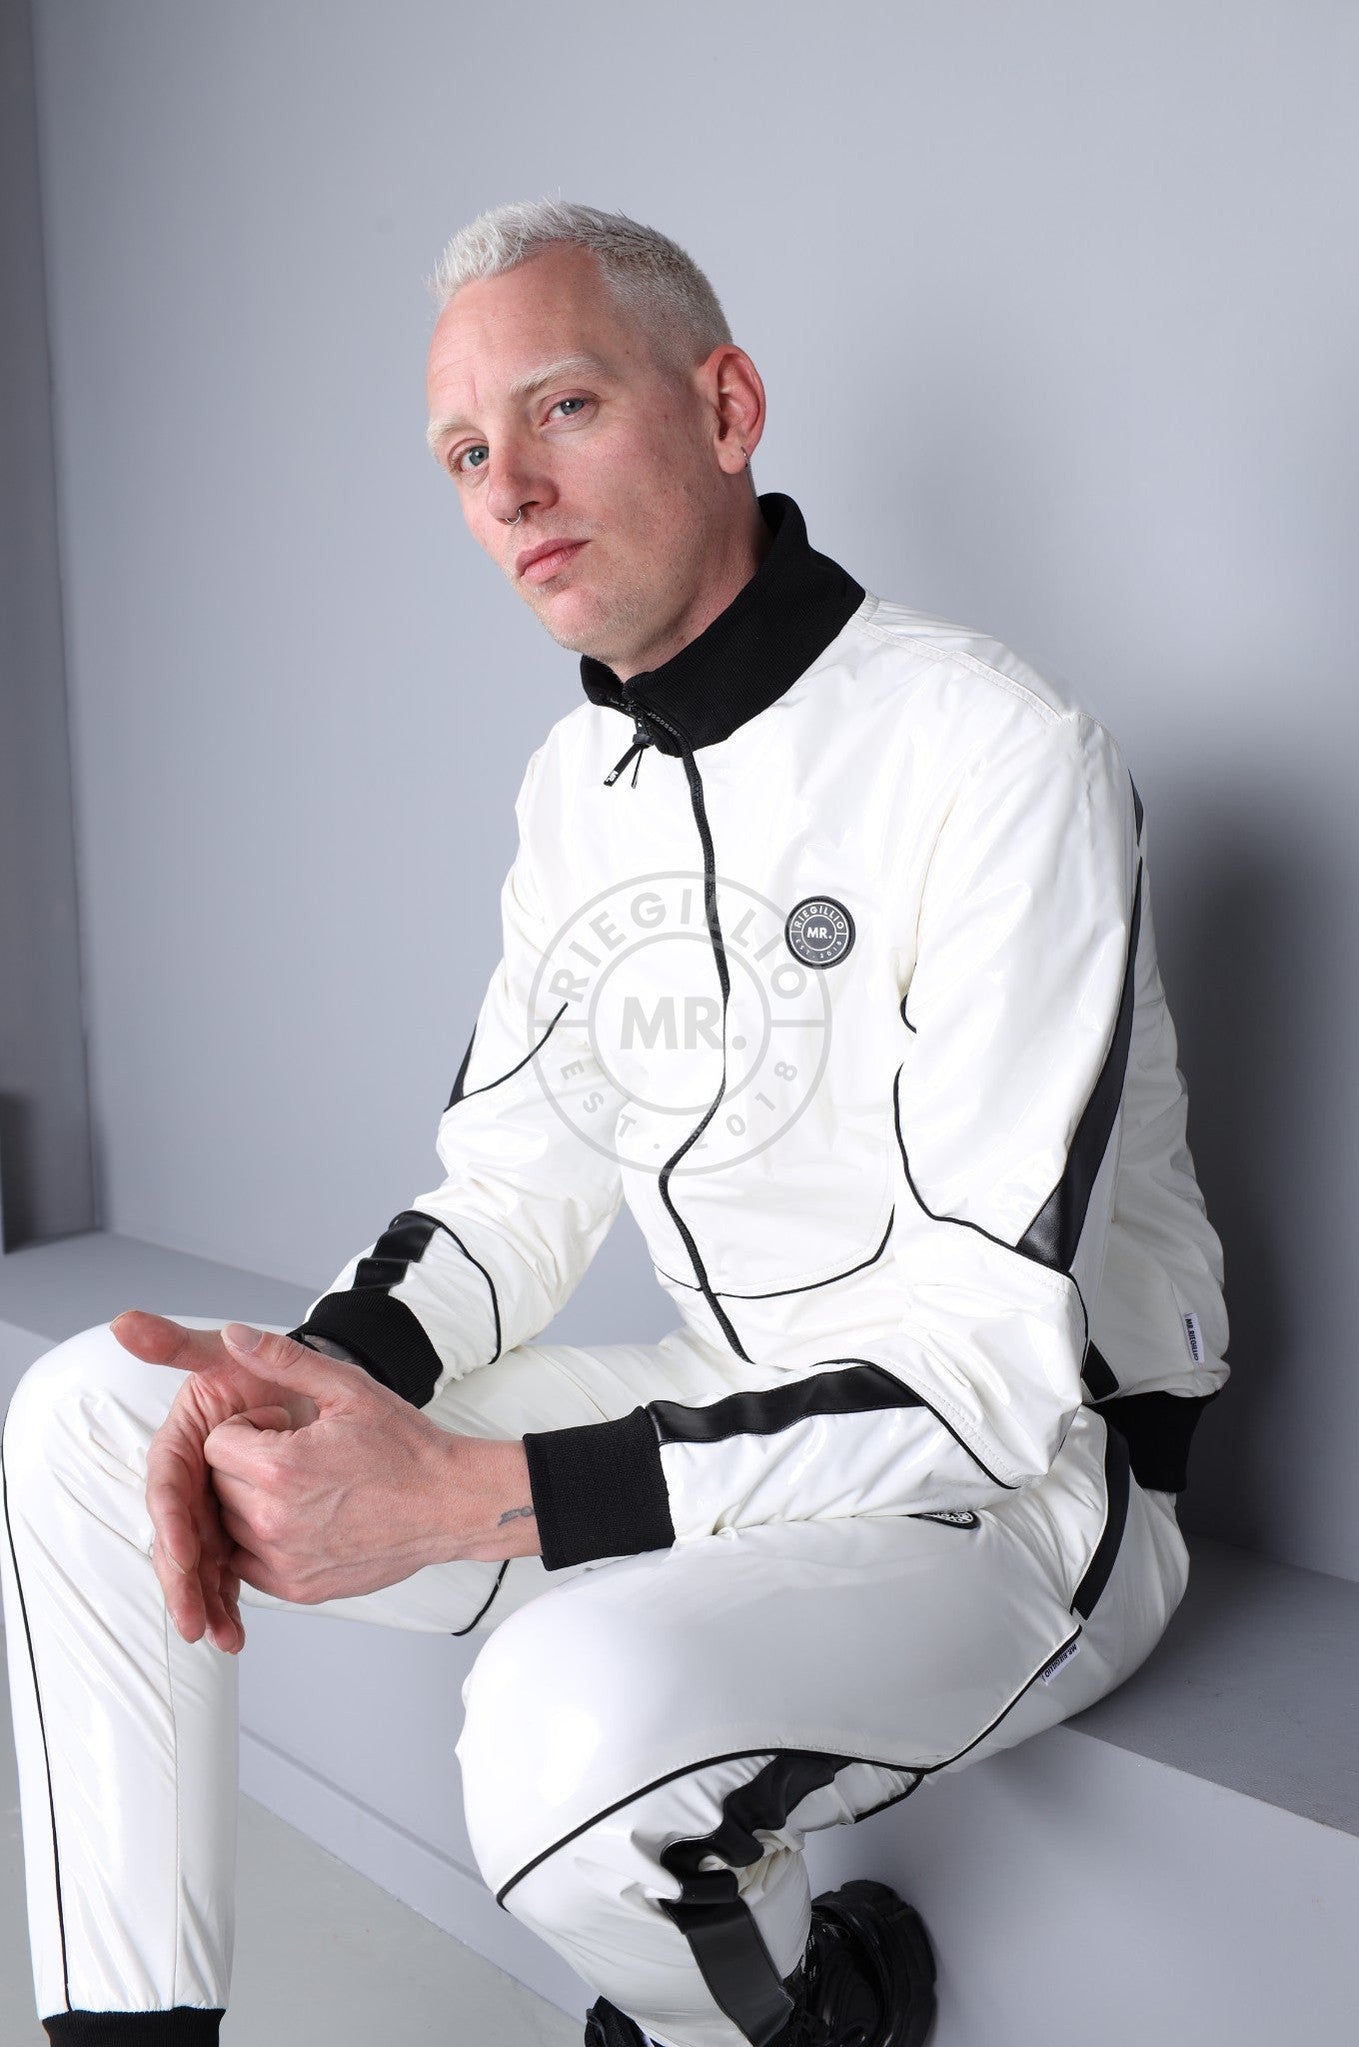 PVC 24 Tracksuit Jacket - White with Black Piping-at MR. Riegillio